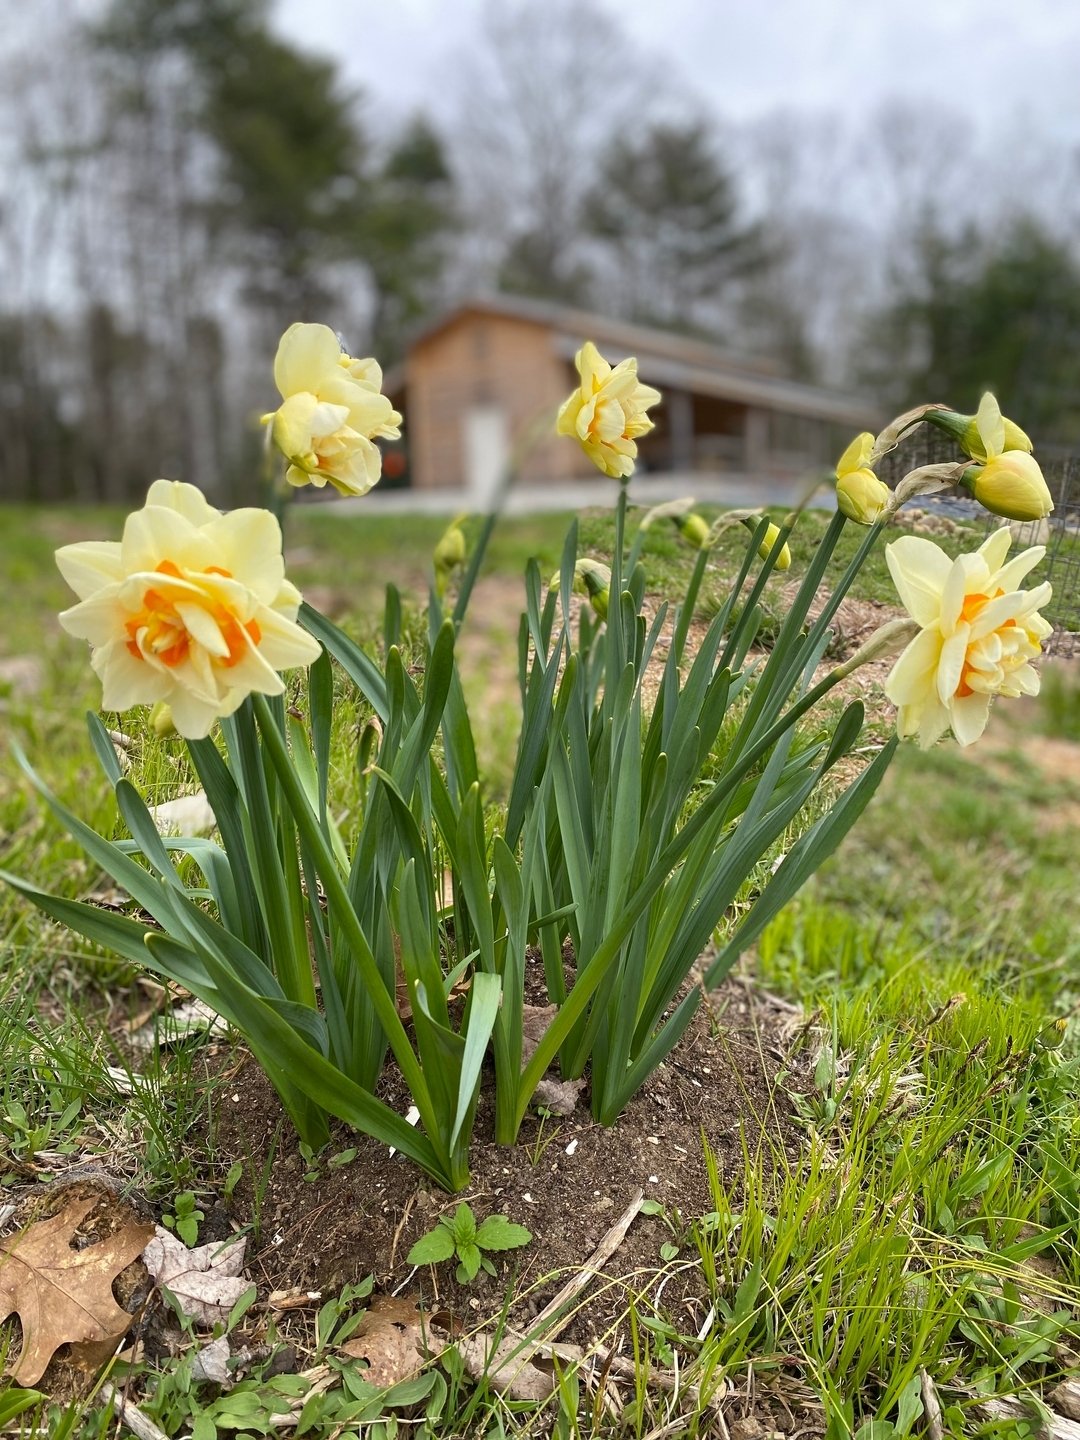 ATTN: Sadly we are cancelling our pop-up at @thealnastoremaine this Saturday. While we do have a few happy #daffodil blooms, this cold snap is really slowing down our flowers from blooming. All of our flowers are growing out in the field. As we are l